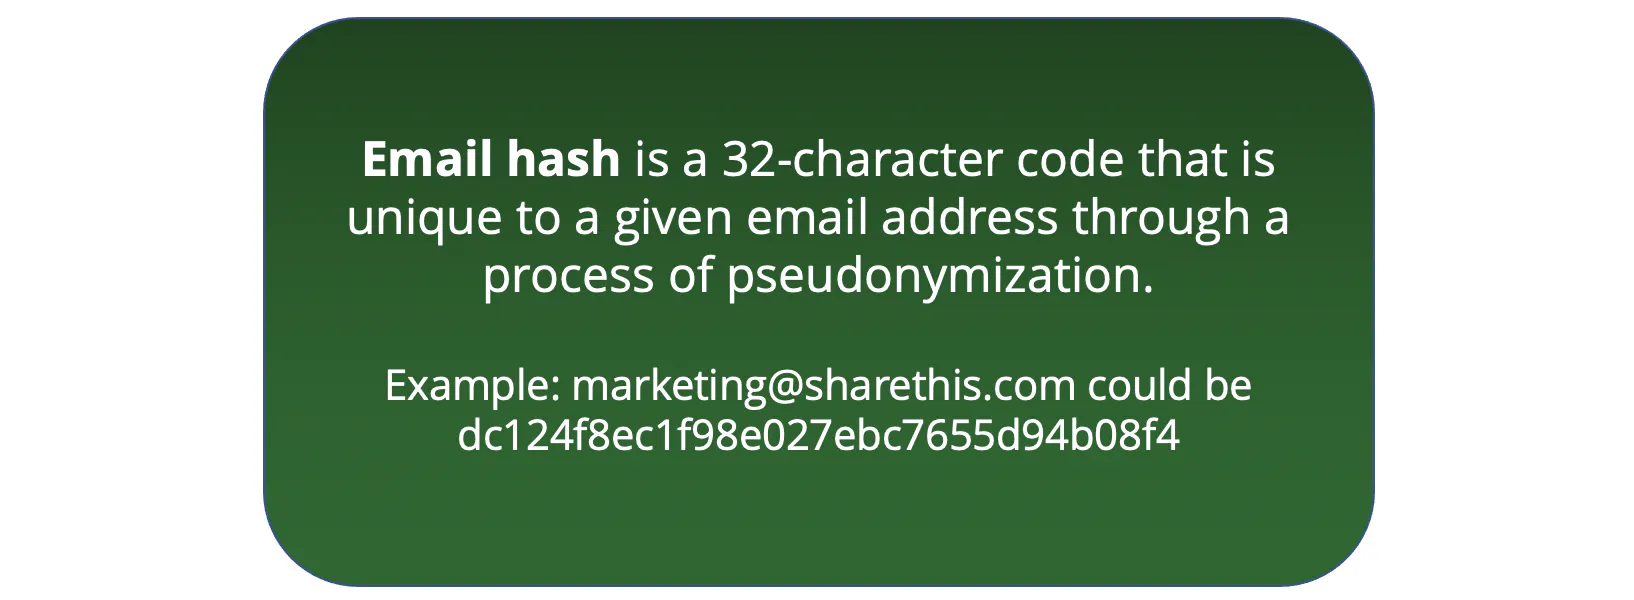 An email has is a 32-character code that is unique to a given email address through a process of pseudonymization